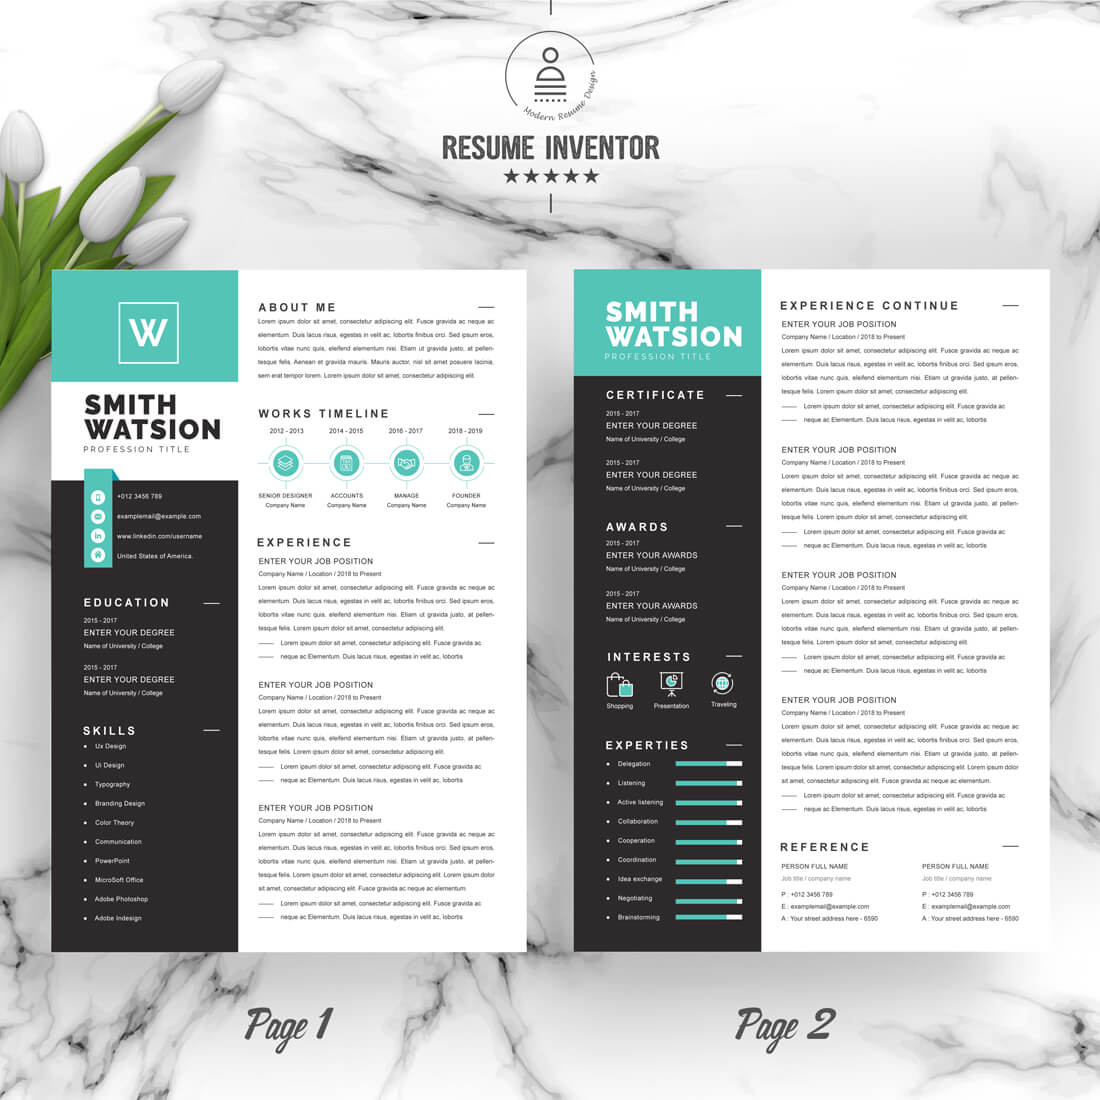 Sleek and Professional Resume Template for Career Advancement in Business, Finance, and Management Fields" preview image.